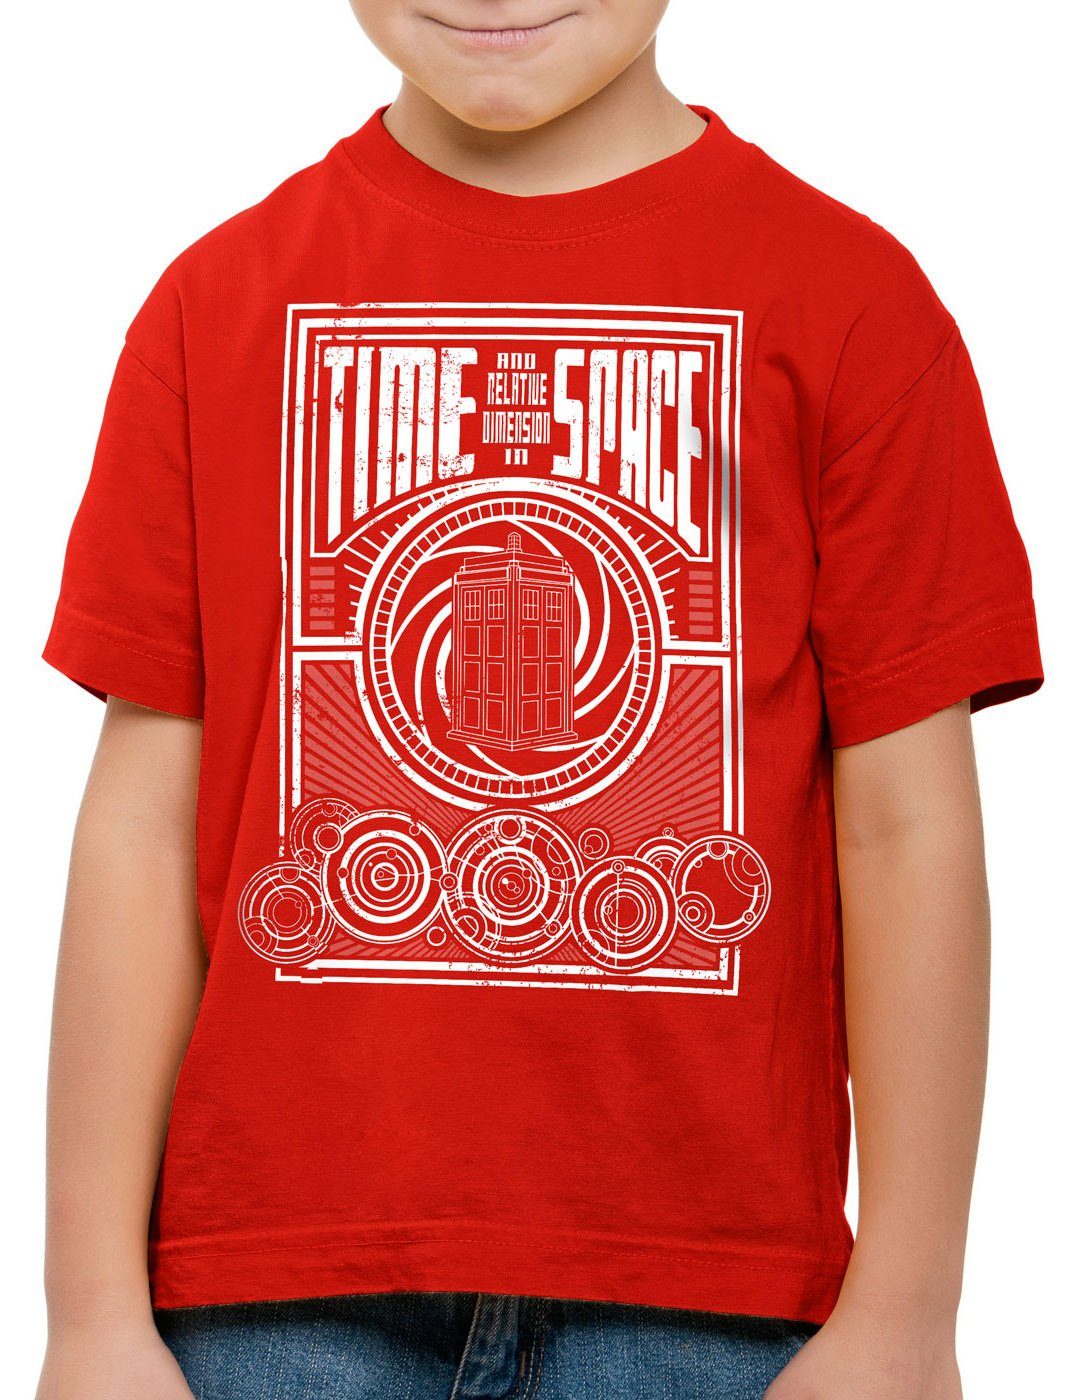 timelord zeitreise meets notrufzelle Time T-Shirt Print-Shirt style3 Space Kinder rot